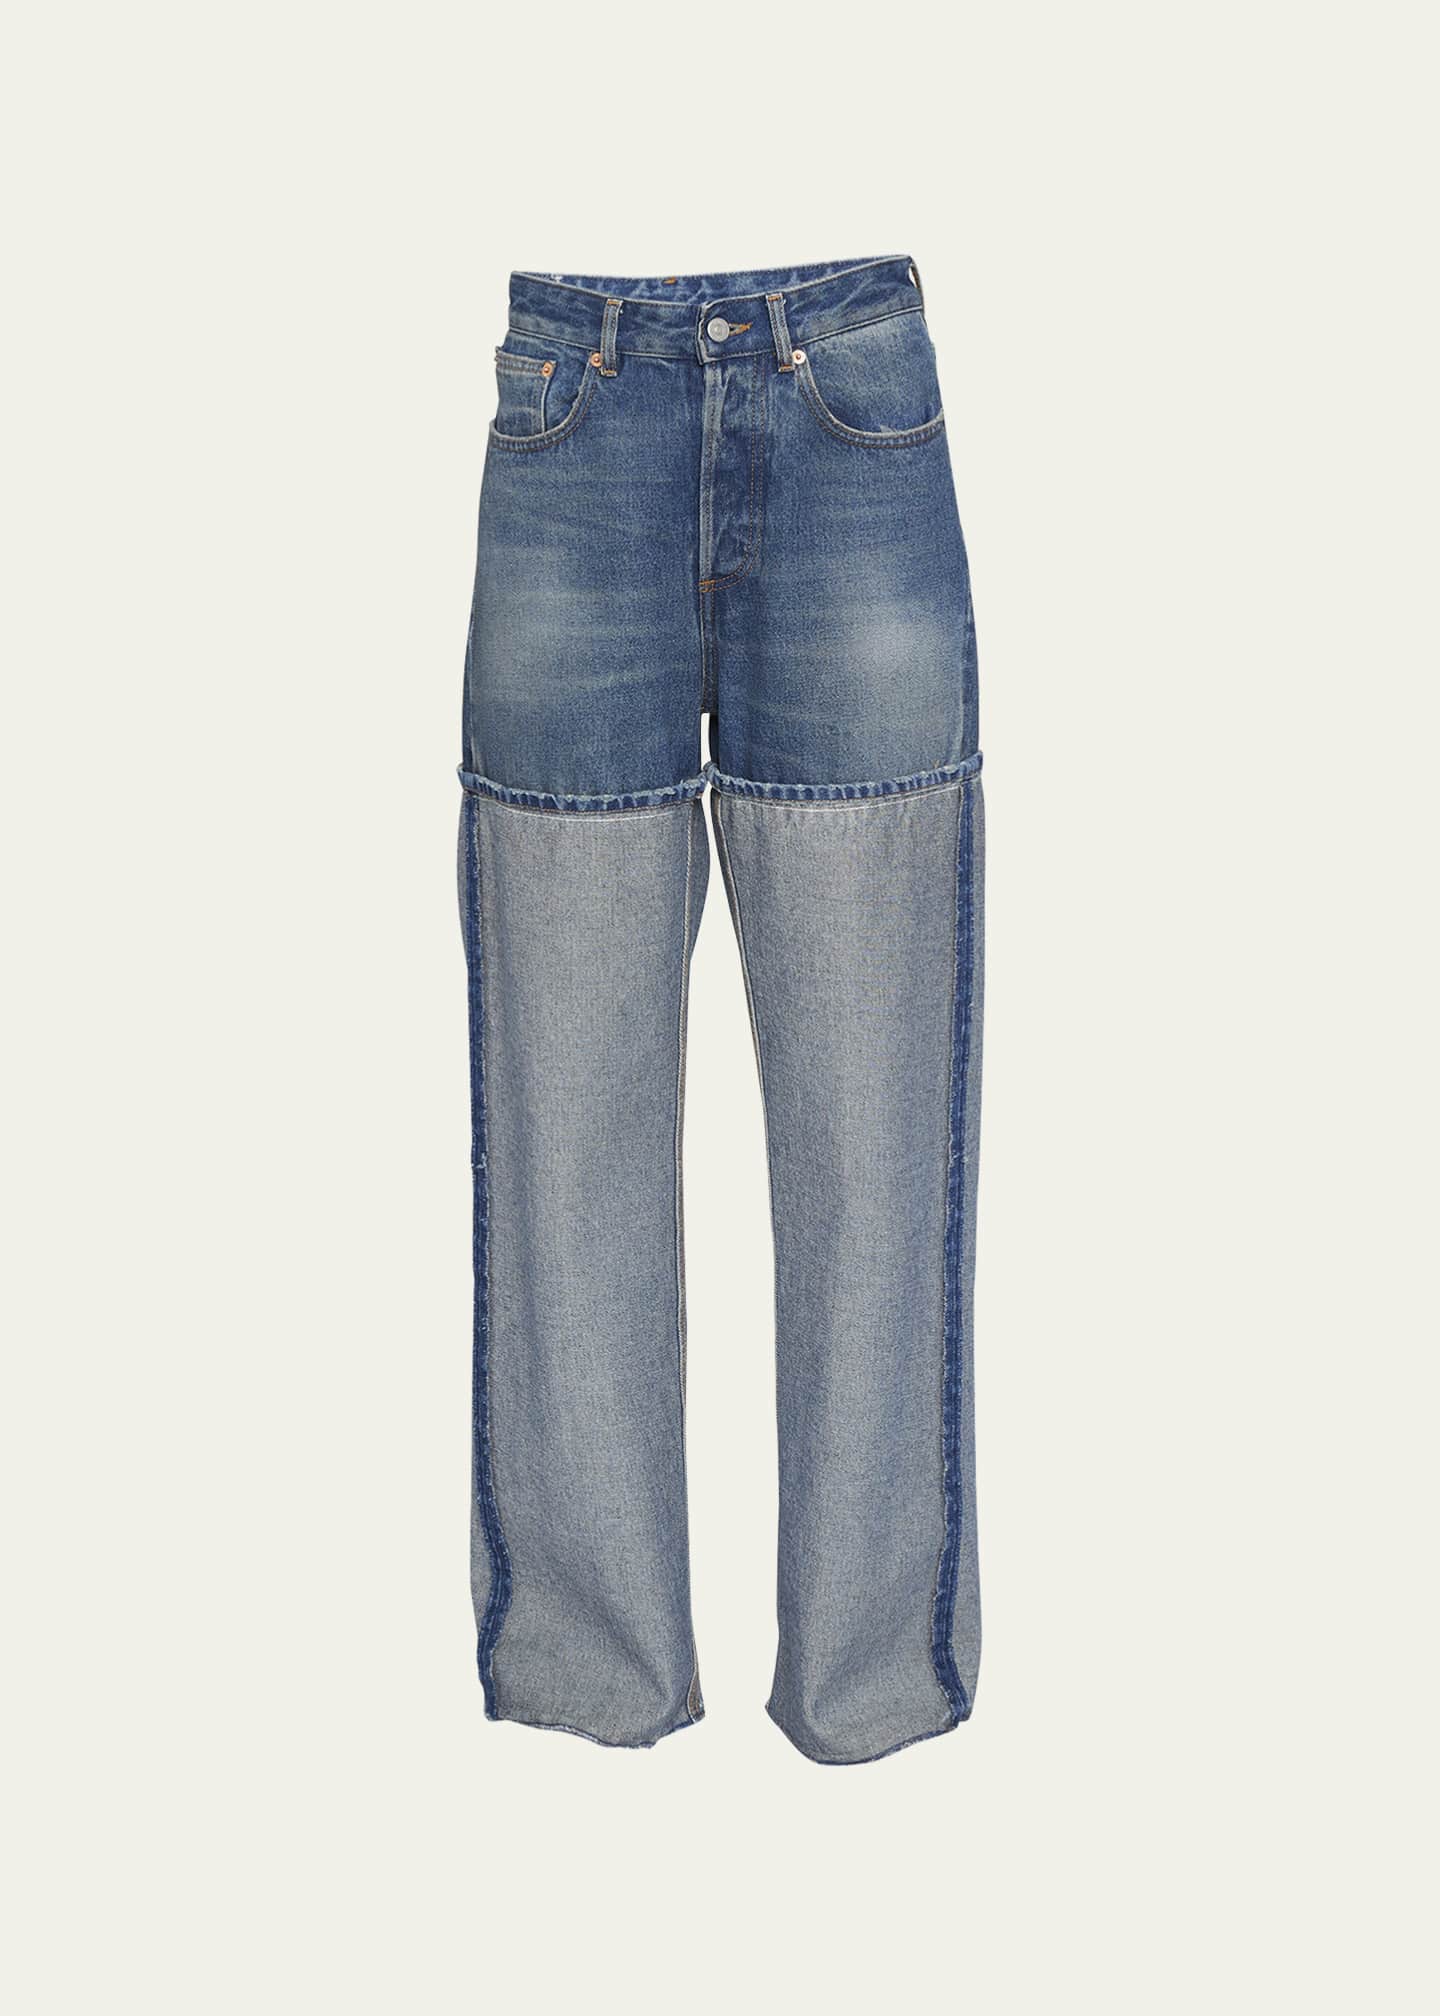 MM6 Maison Margiela Deconstructed Loose Straight Jeans - Bergdorf